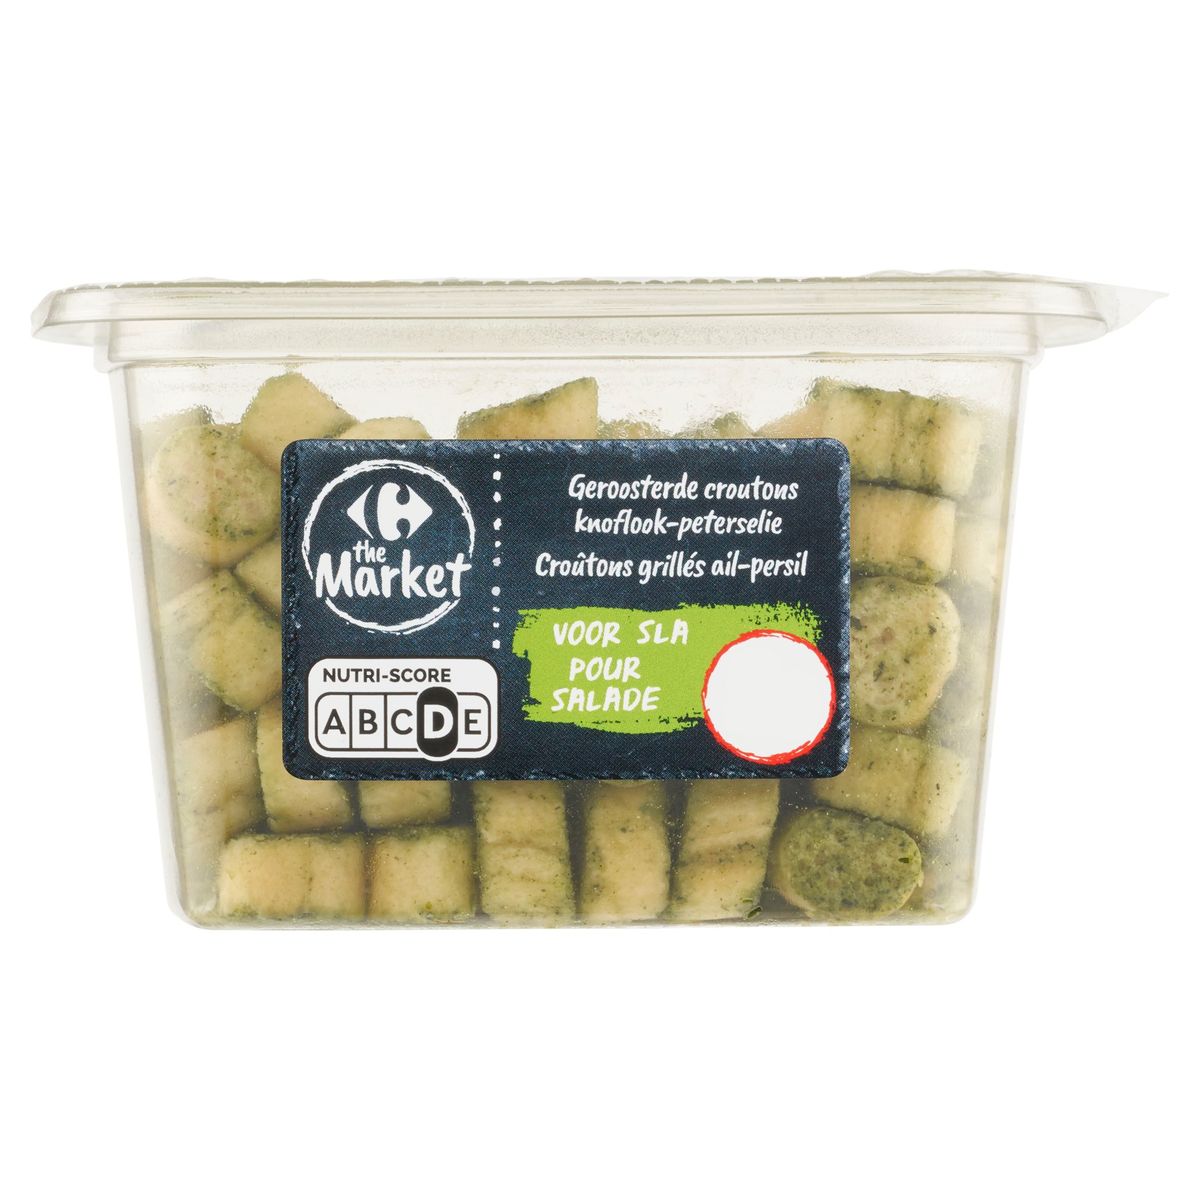 Carrefour The Market Touch of Taste Croûtons & Mix pour Salade 80 g